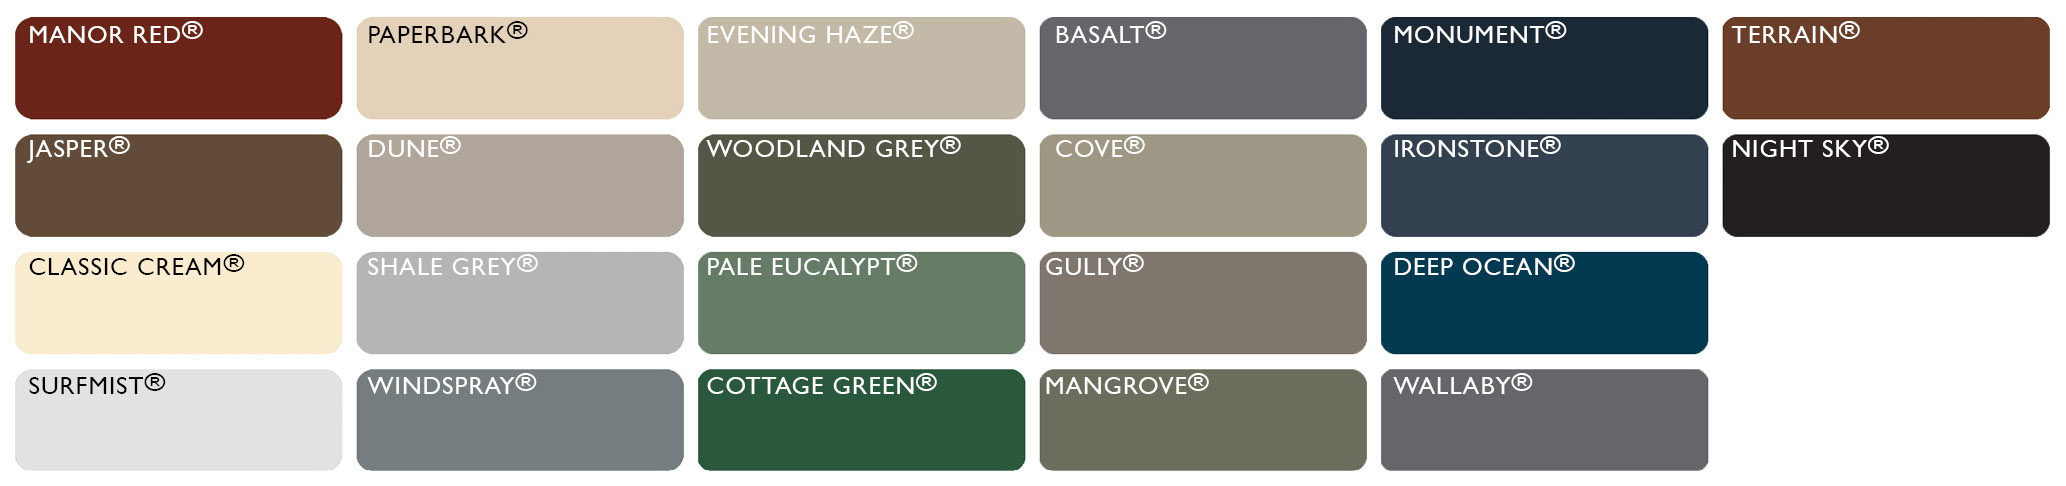 Stramit Colorbond colour chart for SOL Home Improvements shade structures